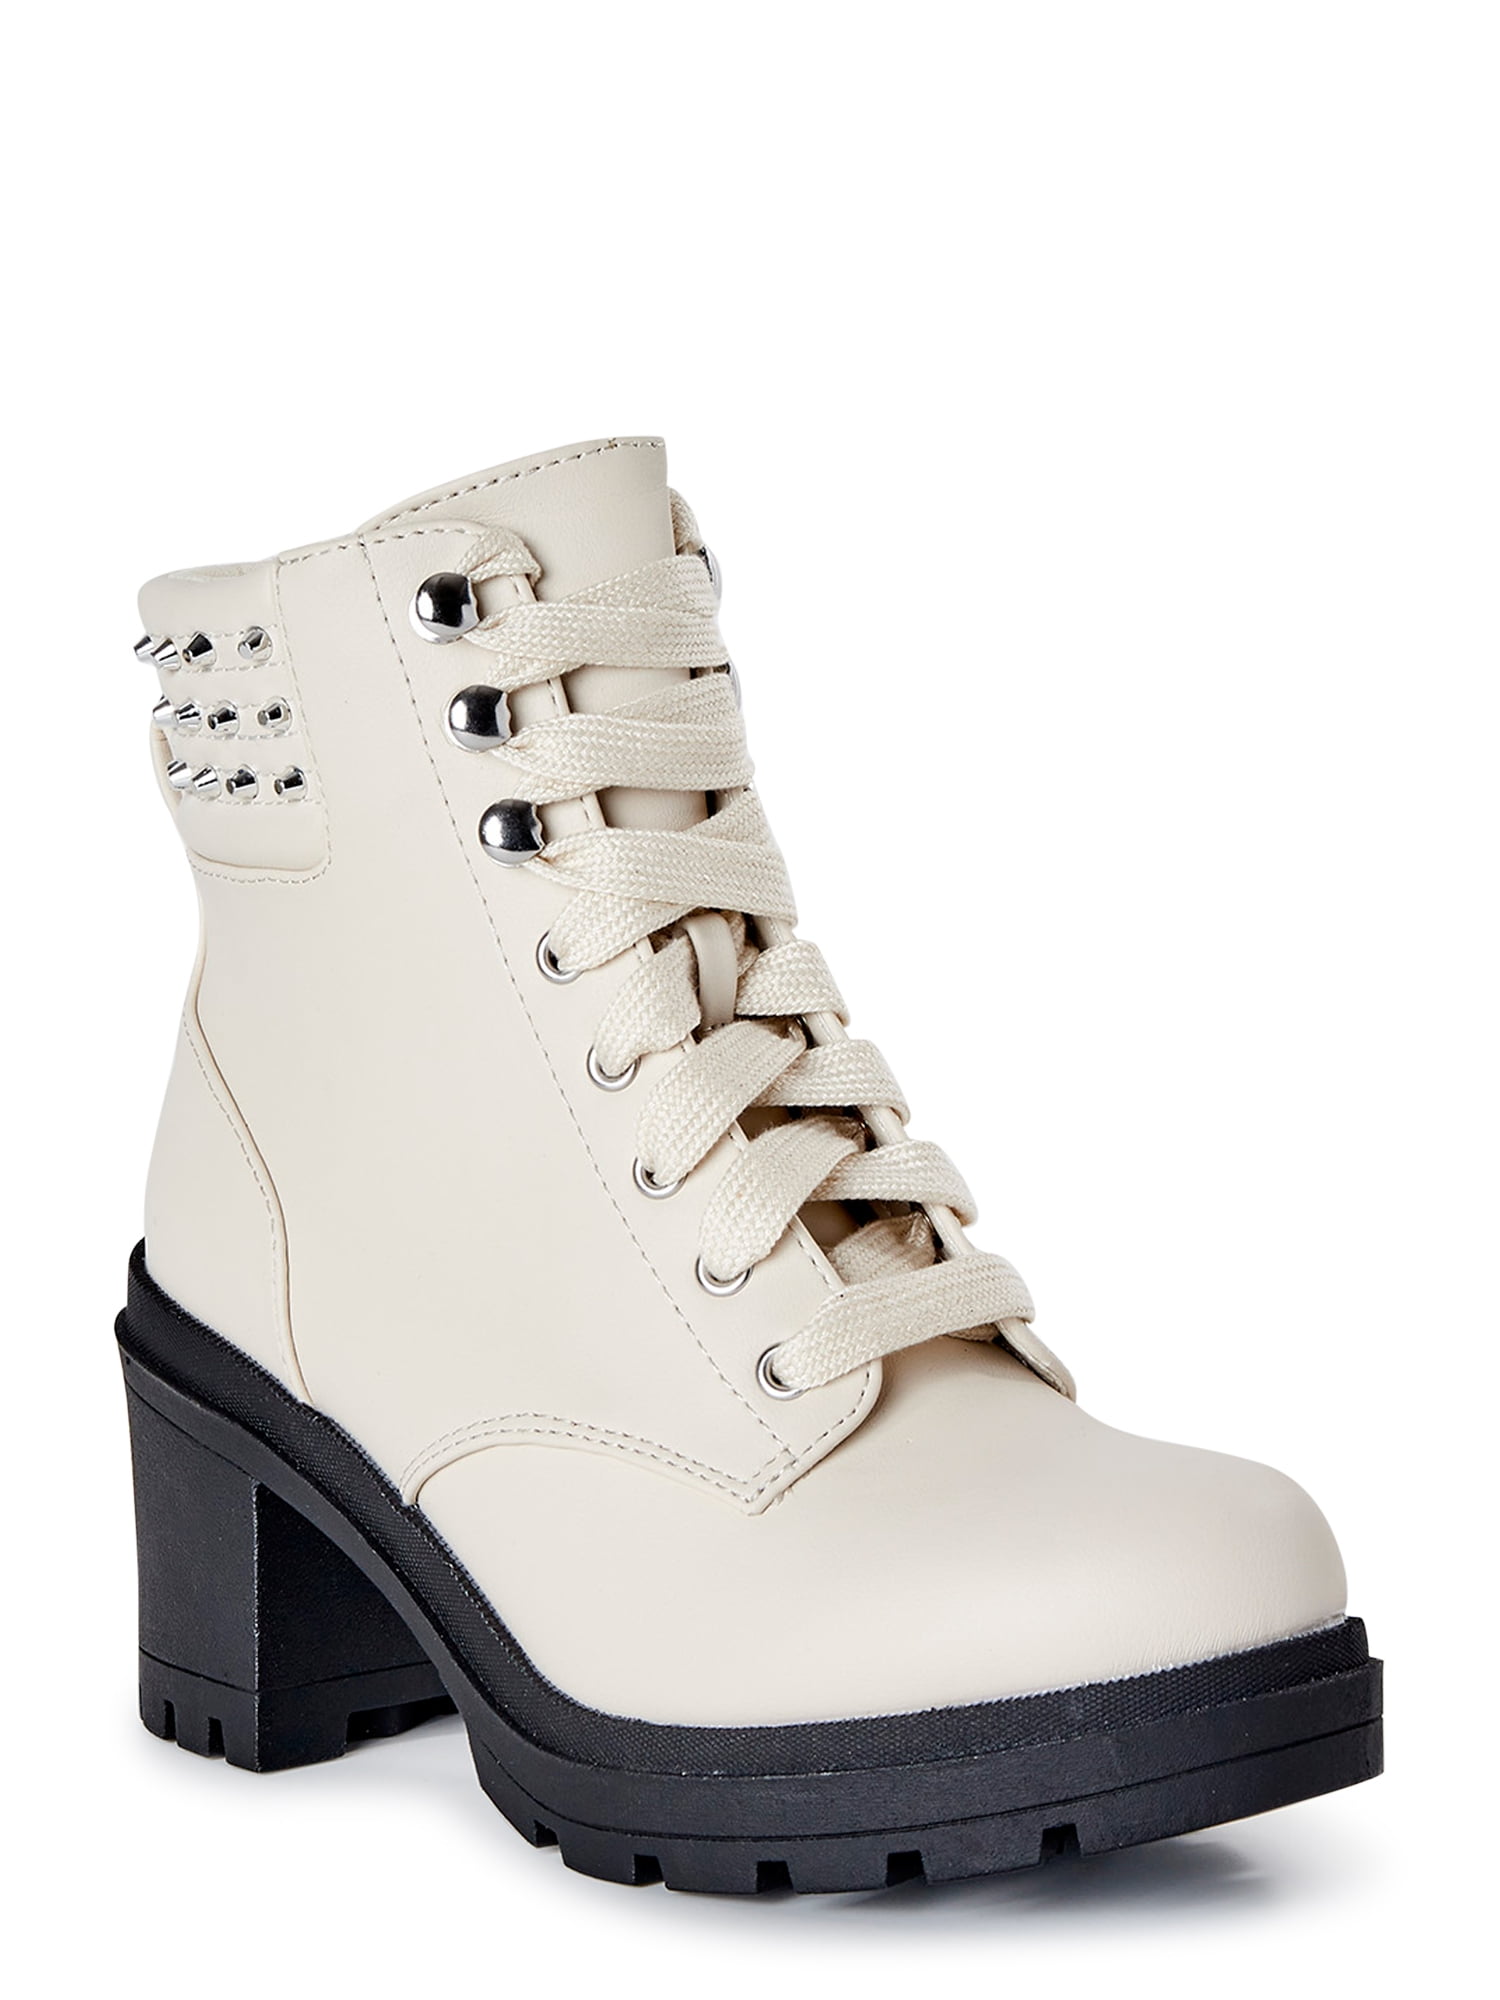 Buy No Boundaries Women's Studded Heeled Moto Boots Online at Lowest ...